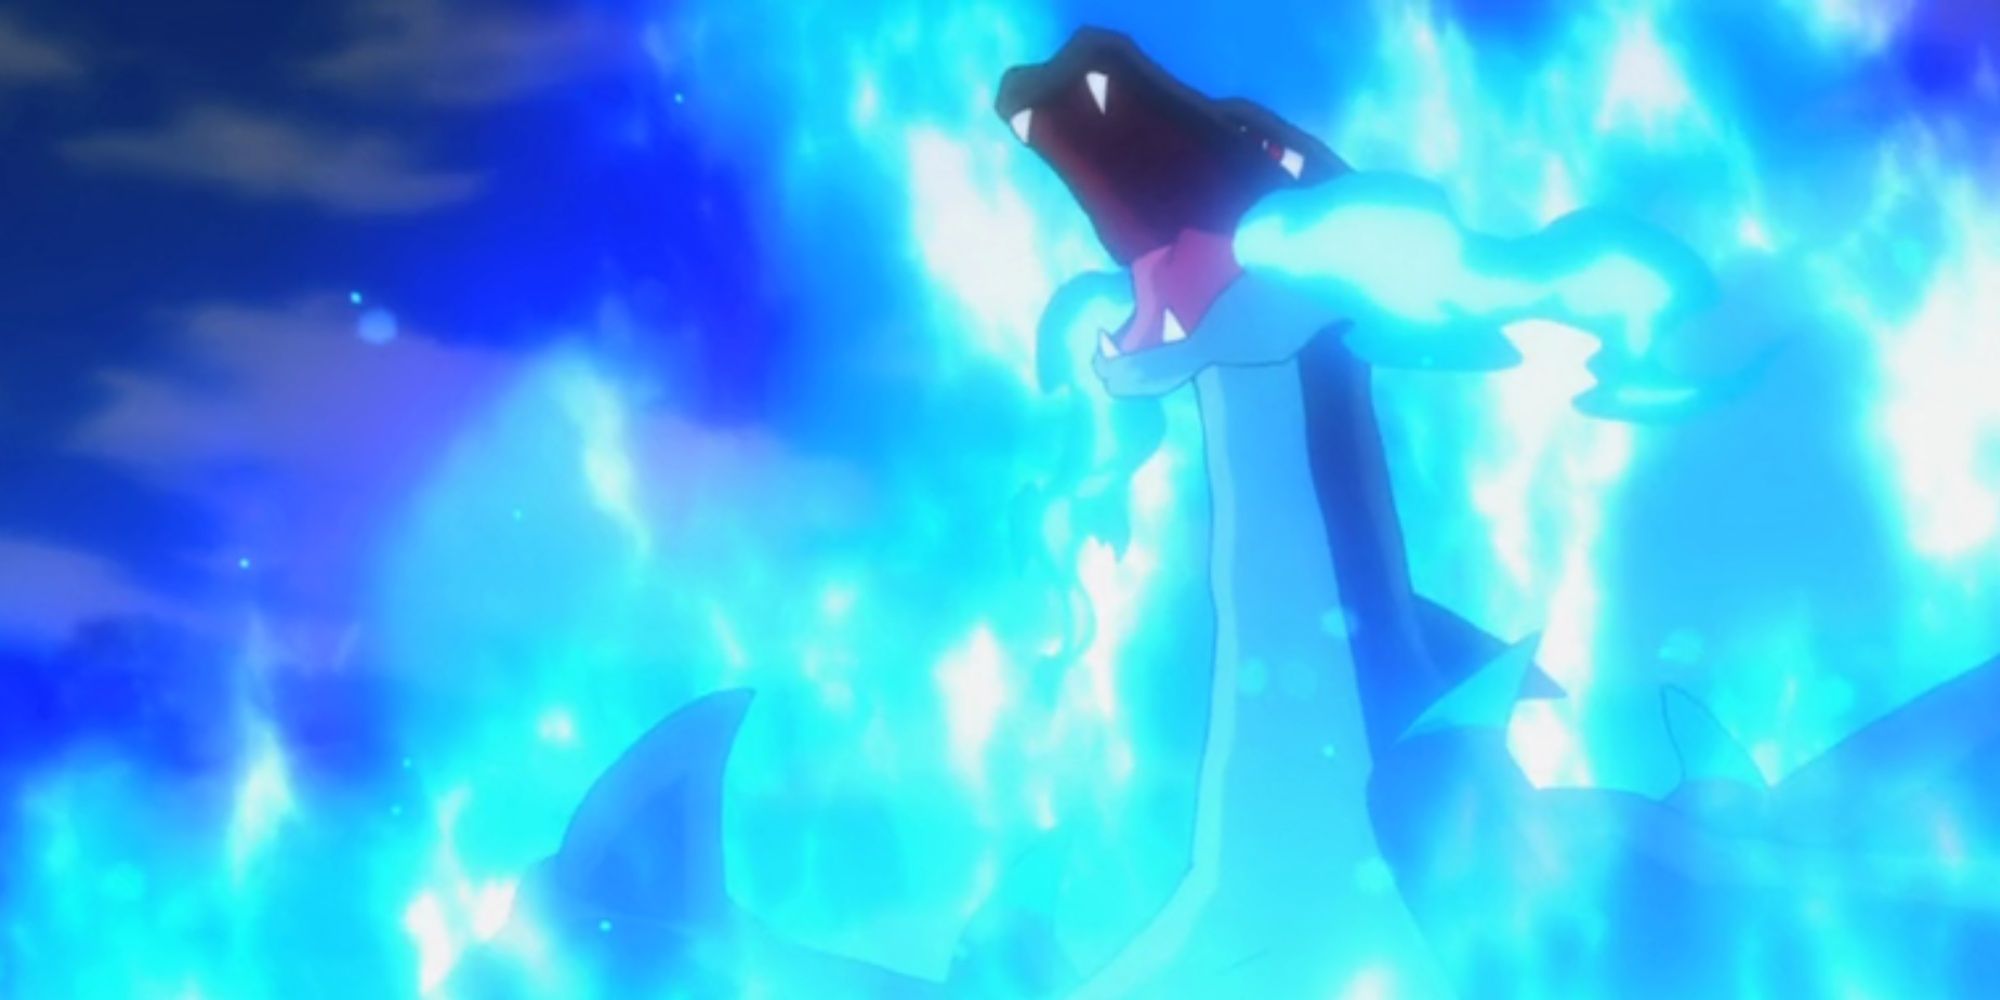 Mega Charizard X in the anime unleashes a Blast Burn attack, surrounded by blue flames.